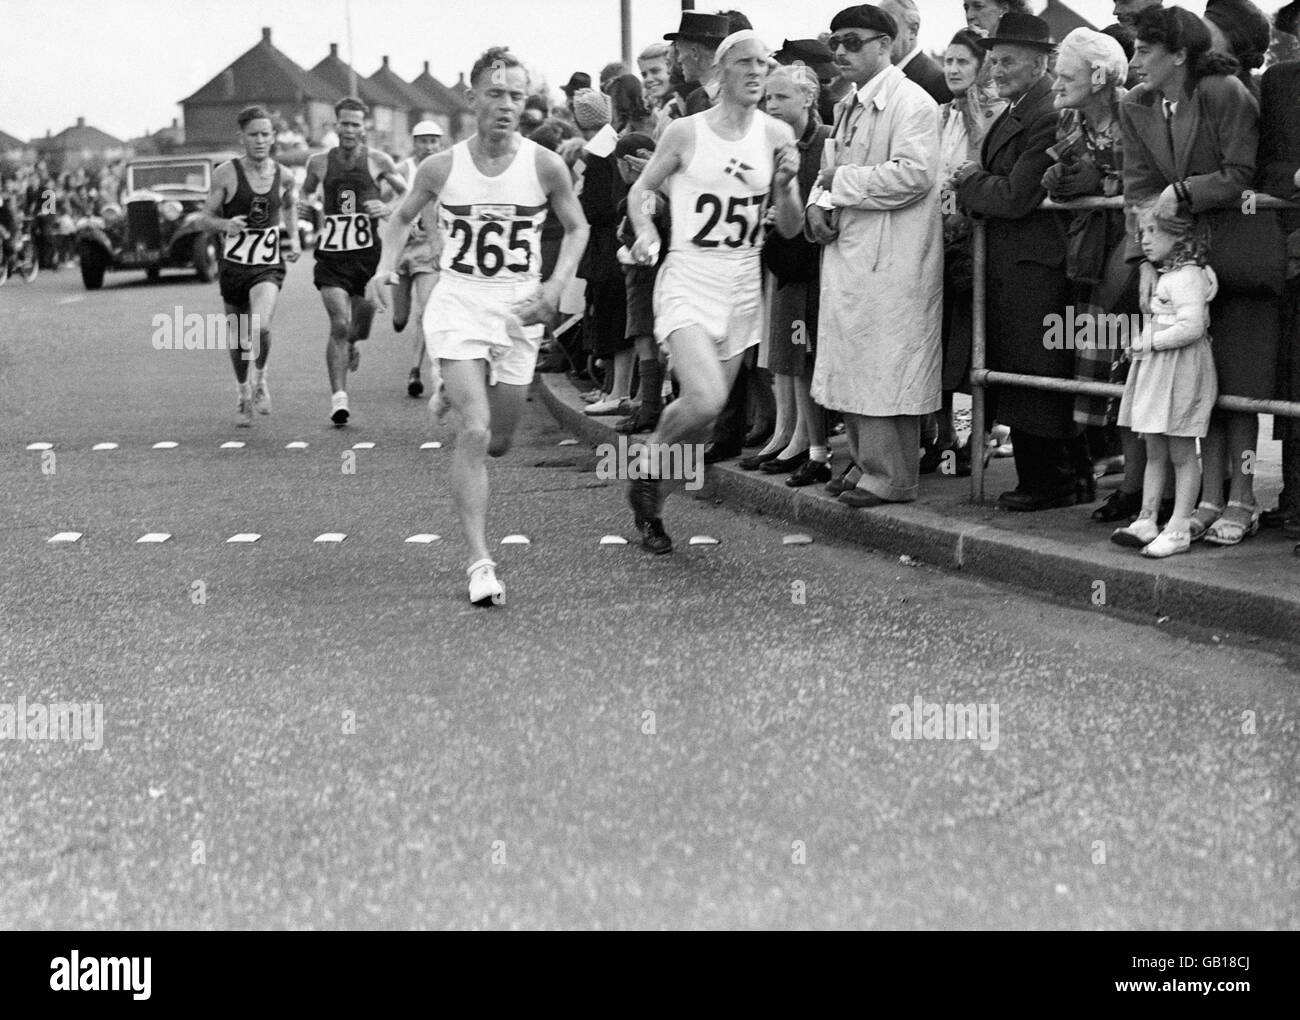 Stanley Jones of Great Britain leads some of the runners through Kingsbury in the Marathon. Next to him is Henning Larsen of Denmark and behind them (279) is Sydney 'Syd' Luyt of South Africa. Stock Photo